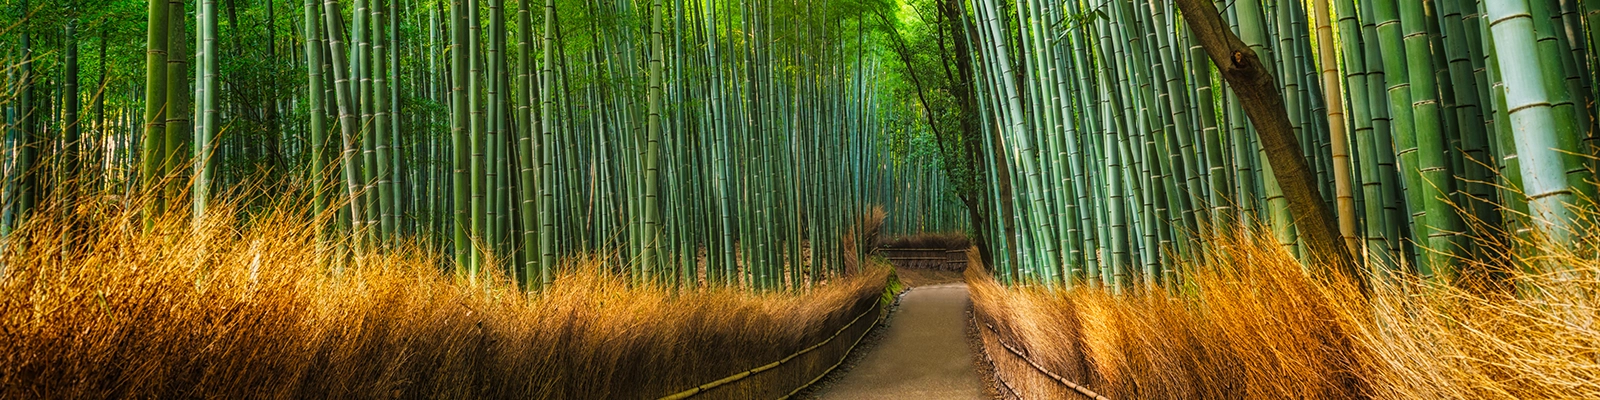 Arashiyama Bamboo Grove in Kyoto, Japan - a scenic bamboo forest with tall, green stalks forming a natural pathway.